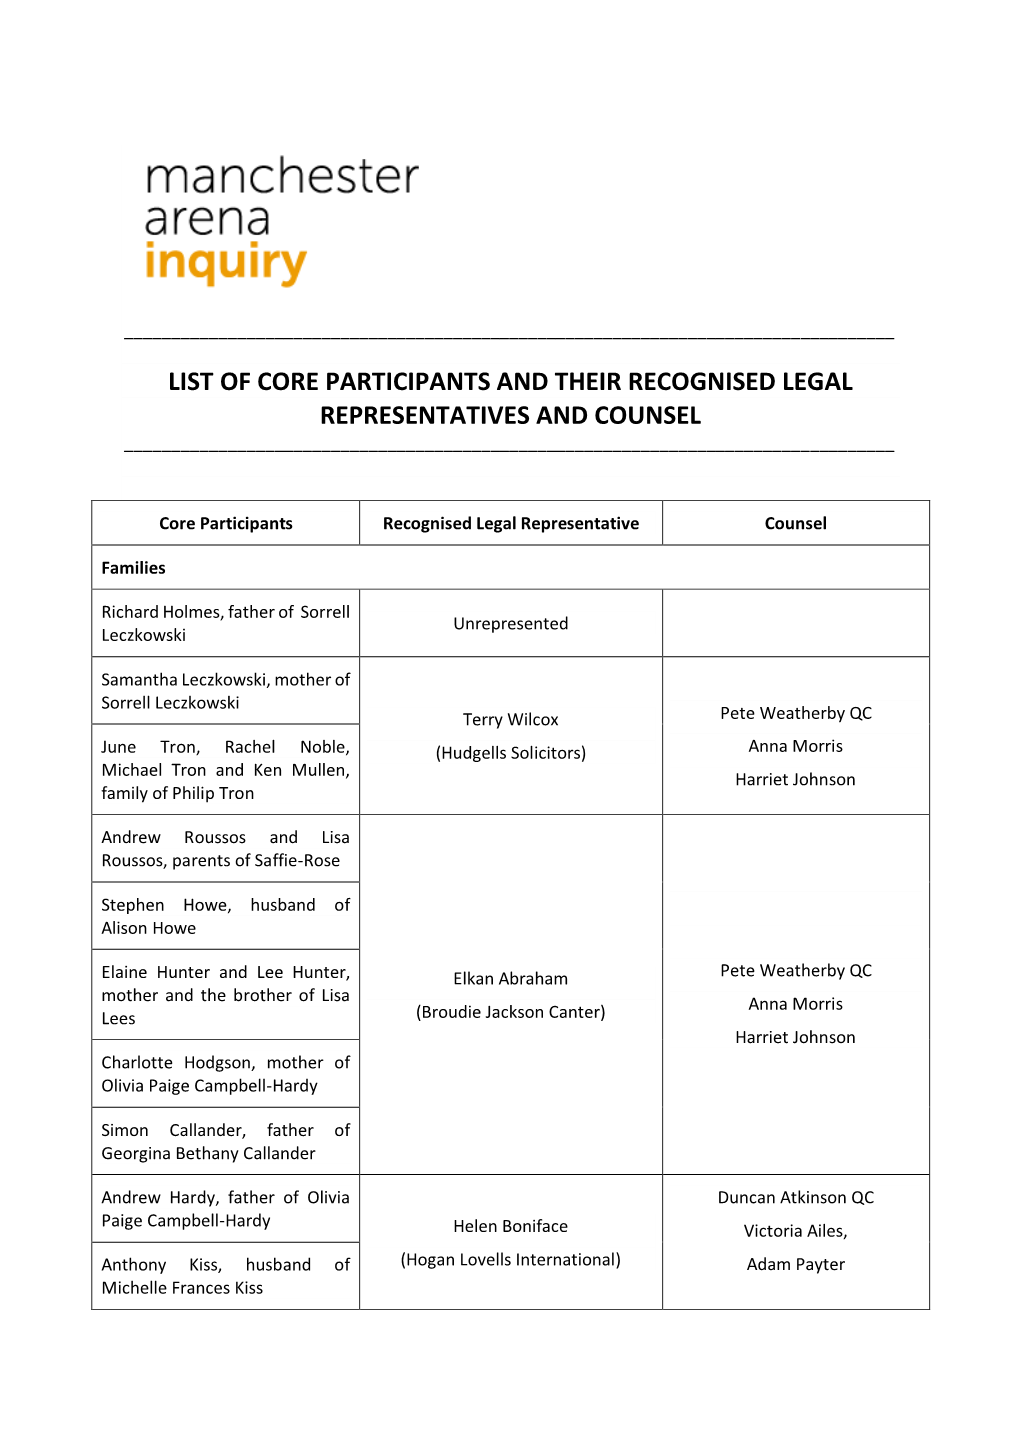 List of Core Participants and Their Recognised Legal Representatives and Counsel ______